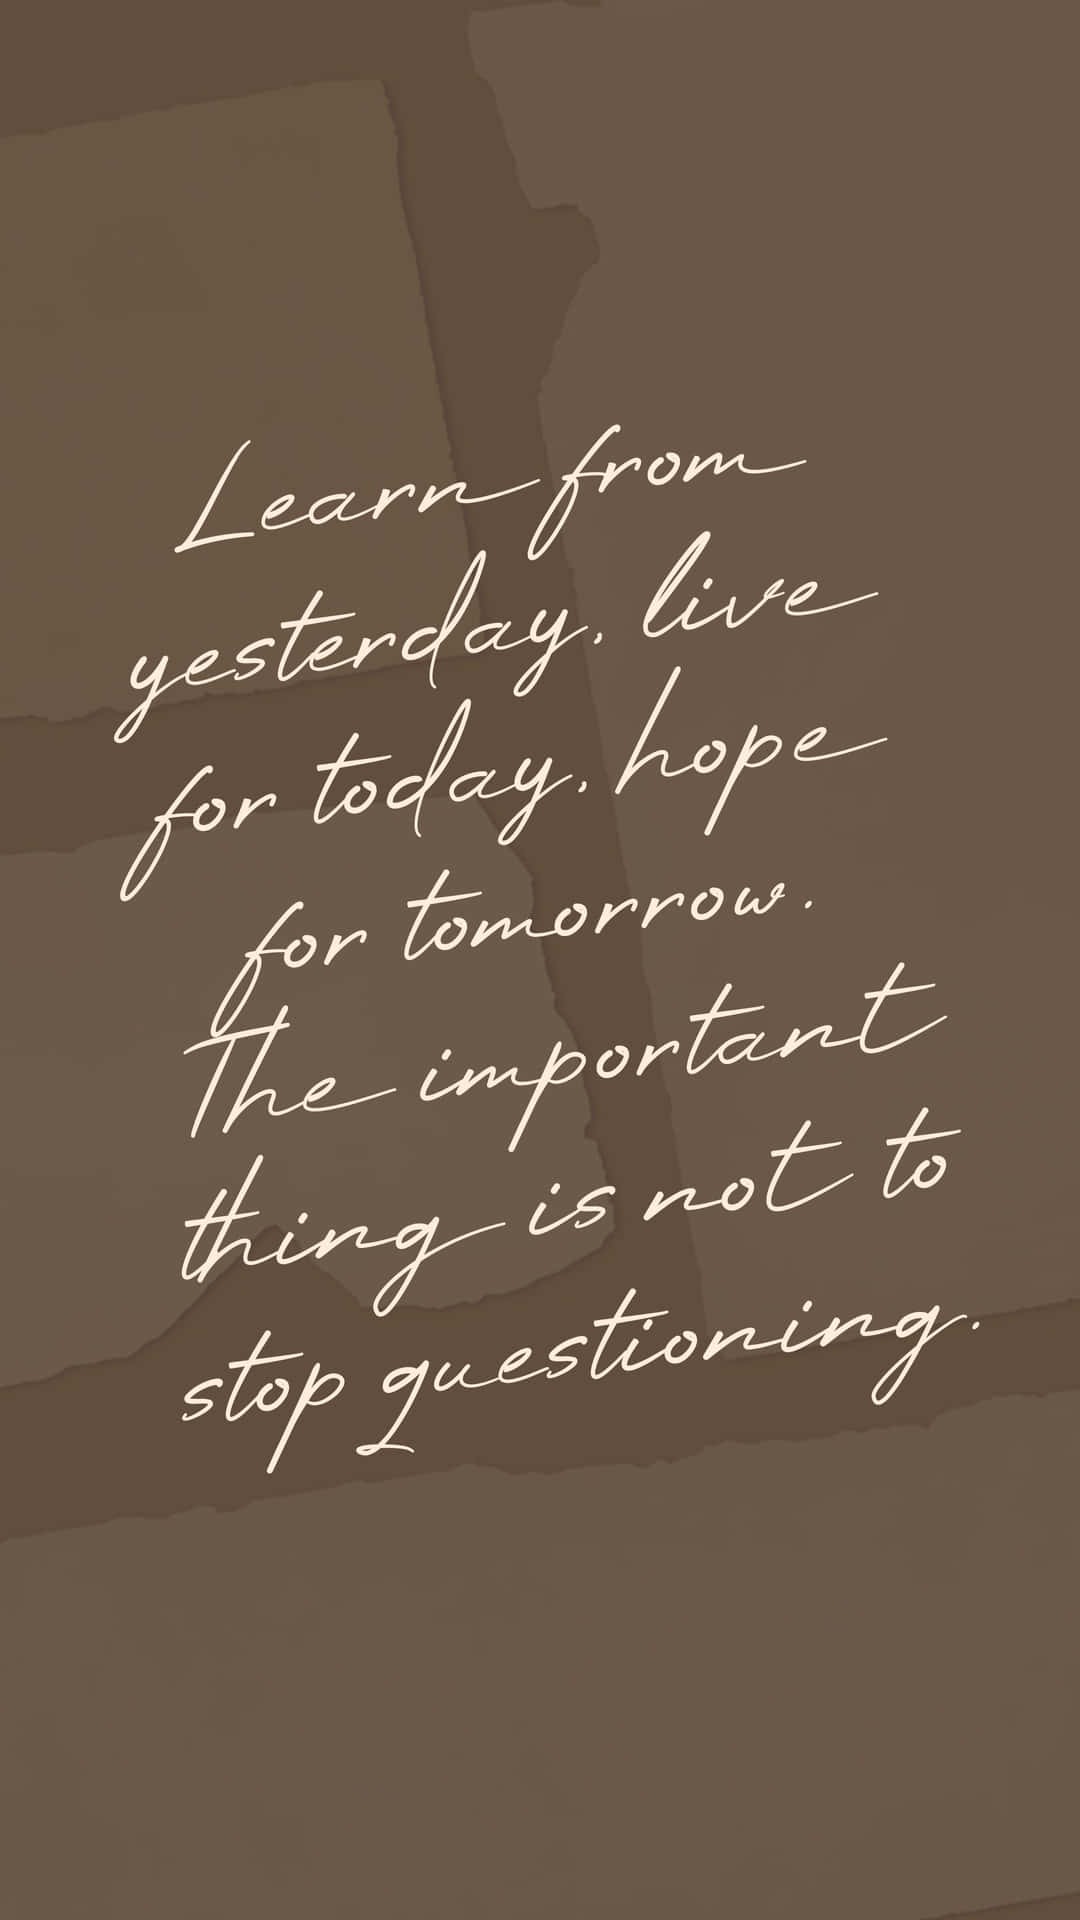 Hope Quote In Brown Background Wallpaper